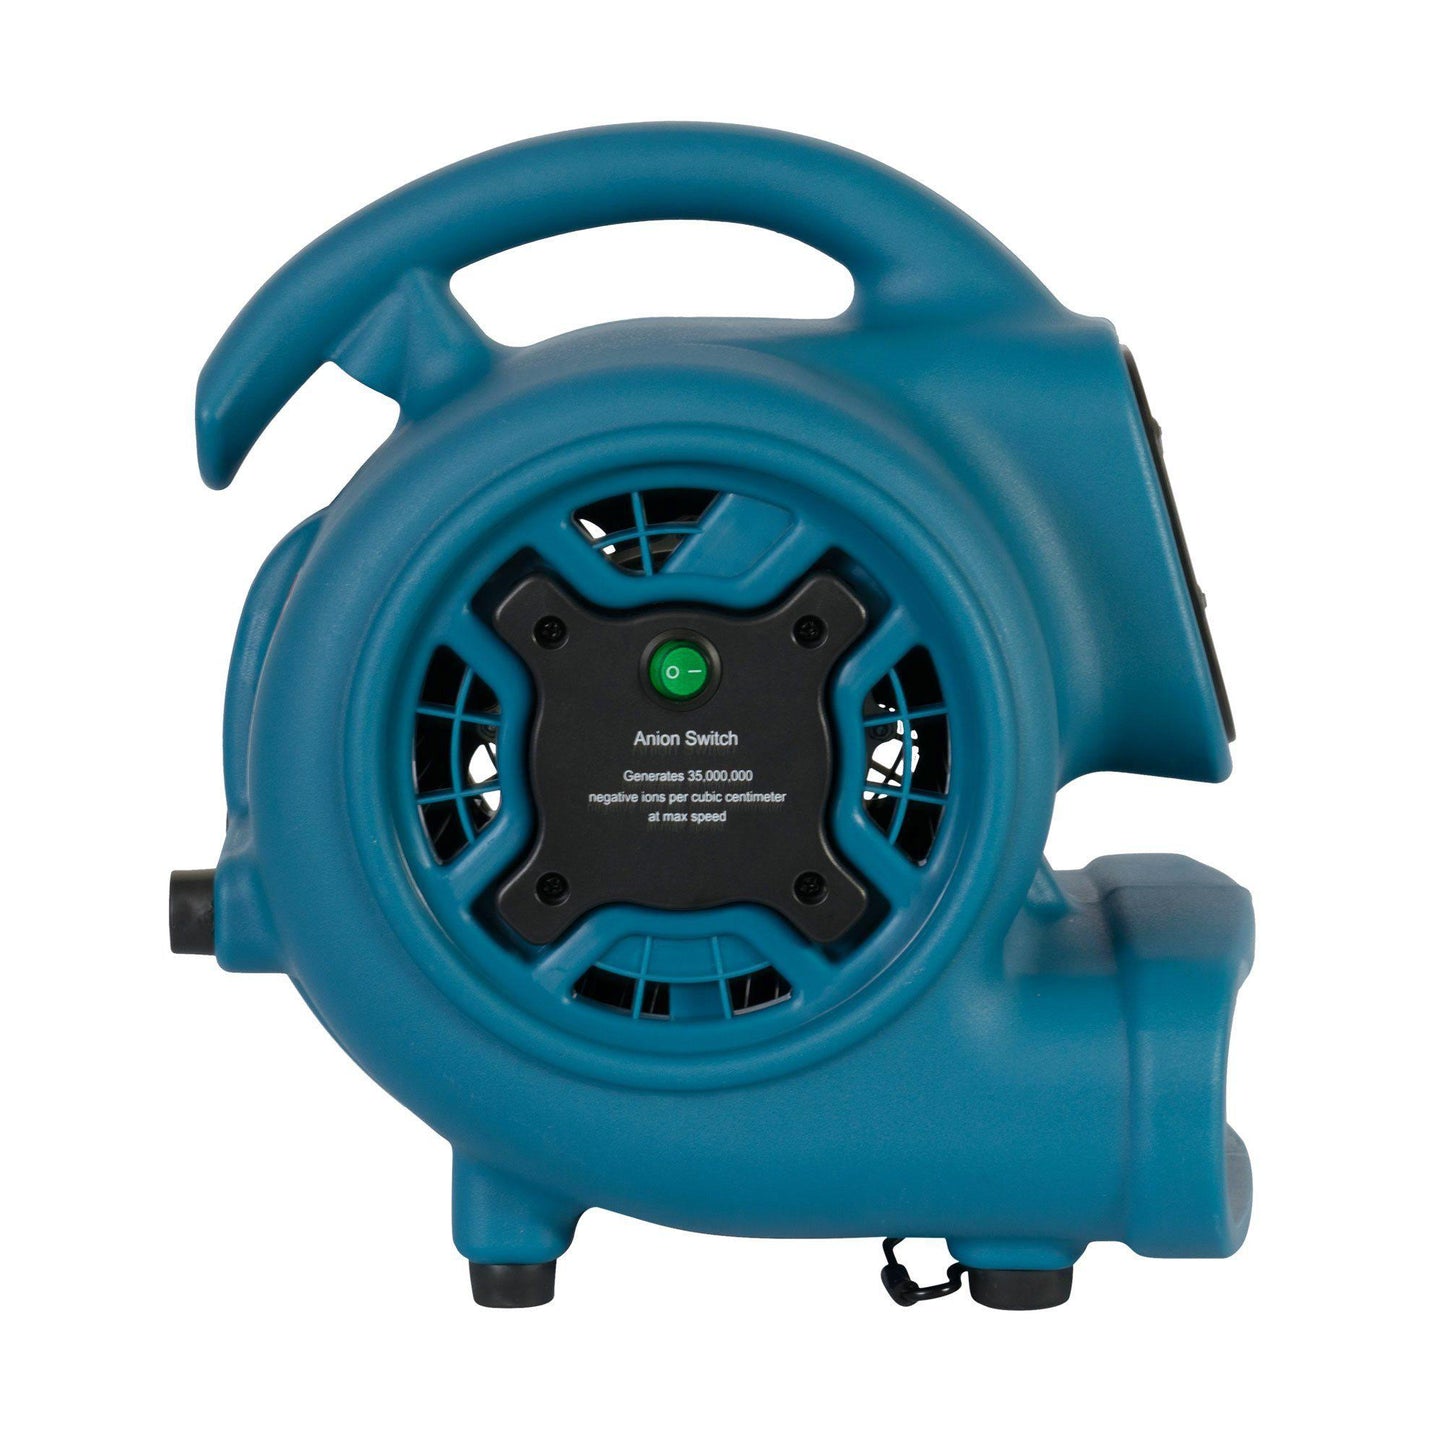 XPOWER P-260NT Freshen Aire 1/5 HP 800 CFM 4 Speed Scented Mini Mighty Air Mover, Dryer, Blower w/ Ionizer and Timer-Dryers-Pet's Choice Supply